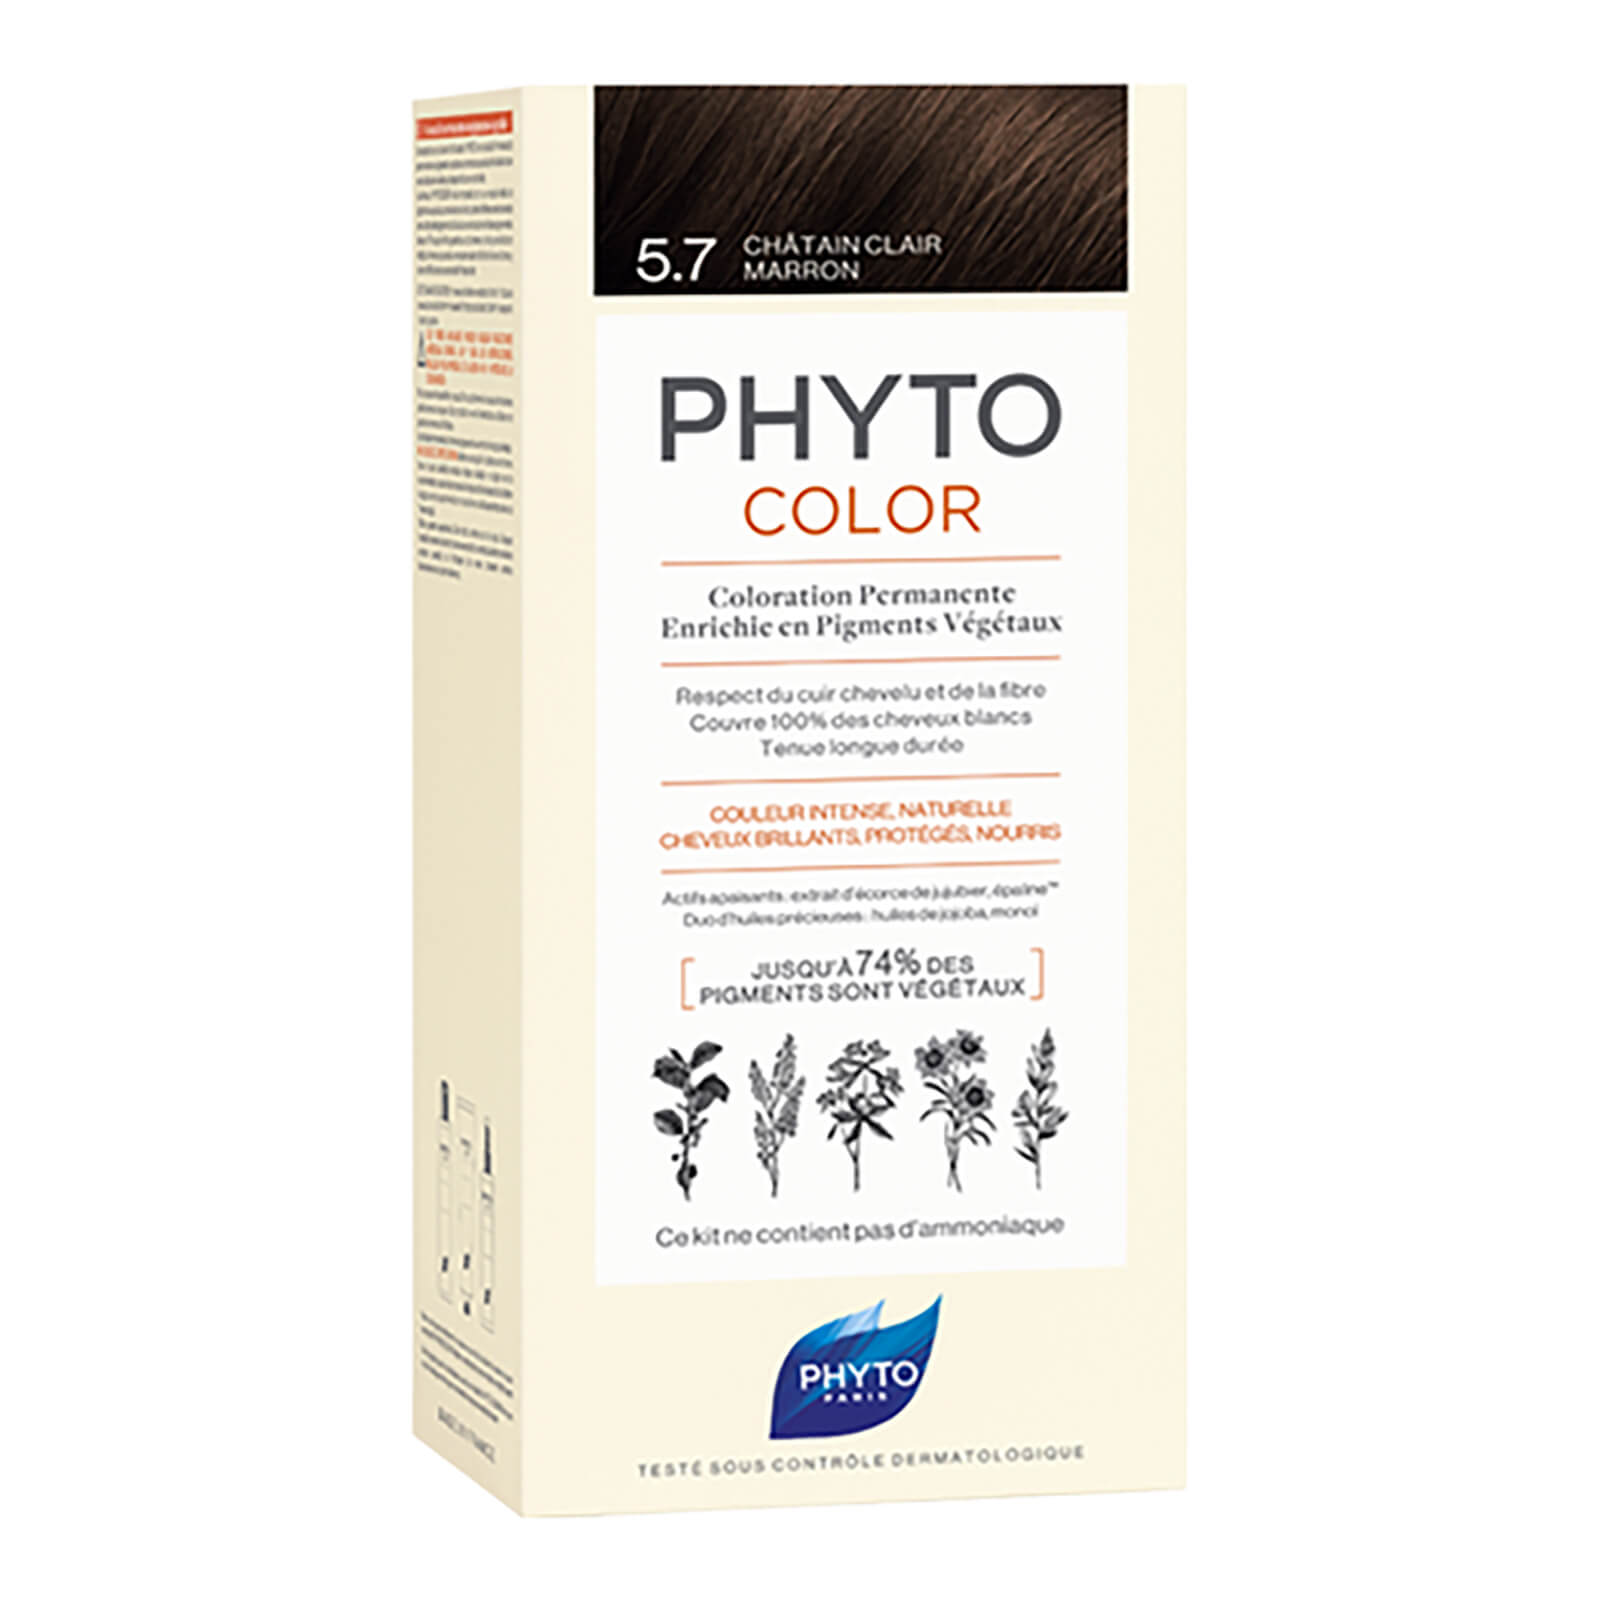 Phyto Hair Colour By Color - 5.7 Light Chestnut 180g In White